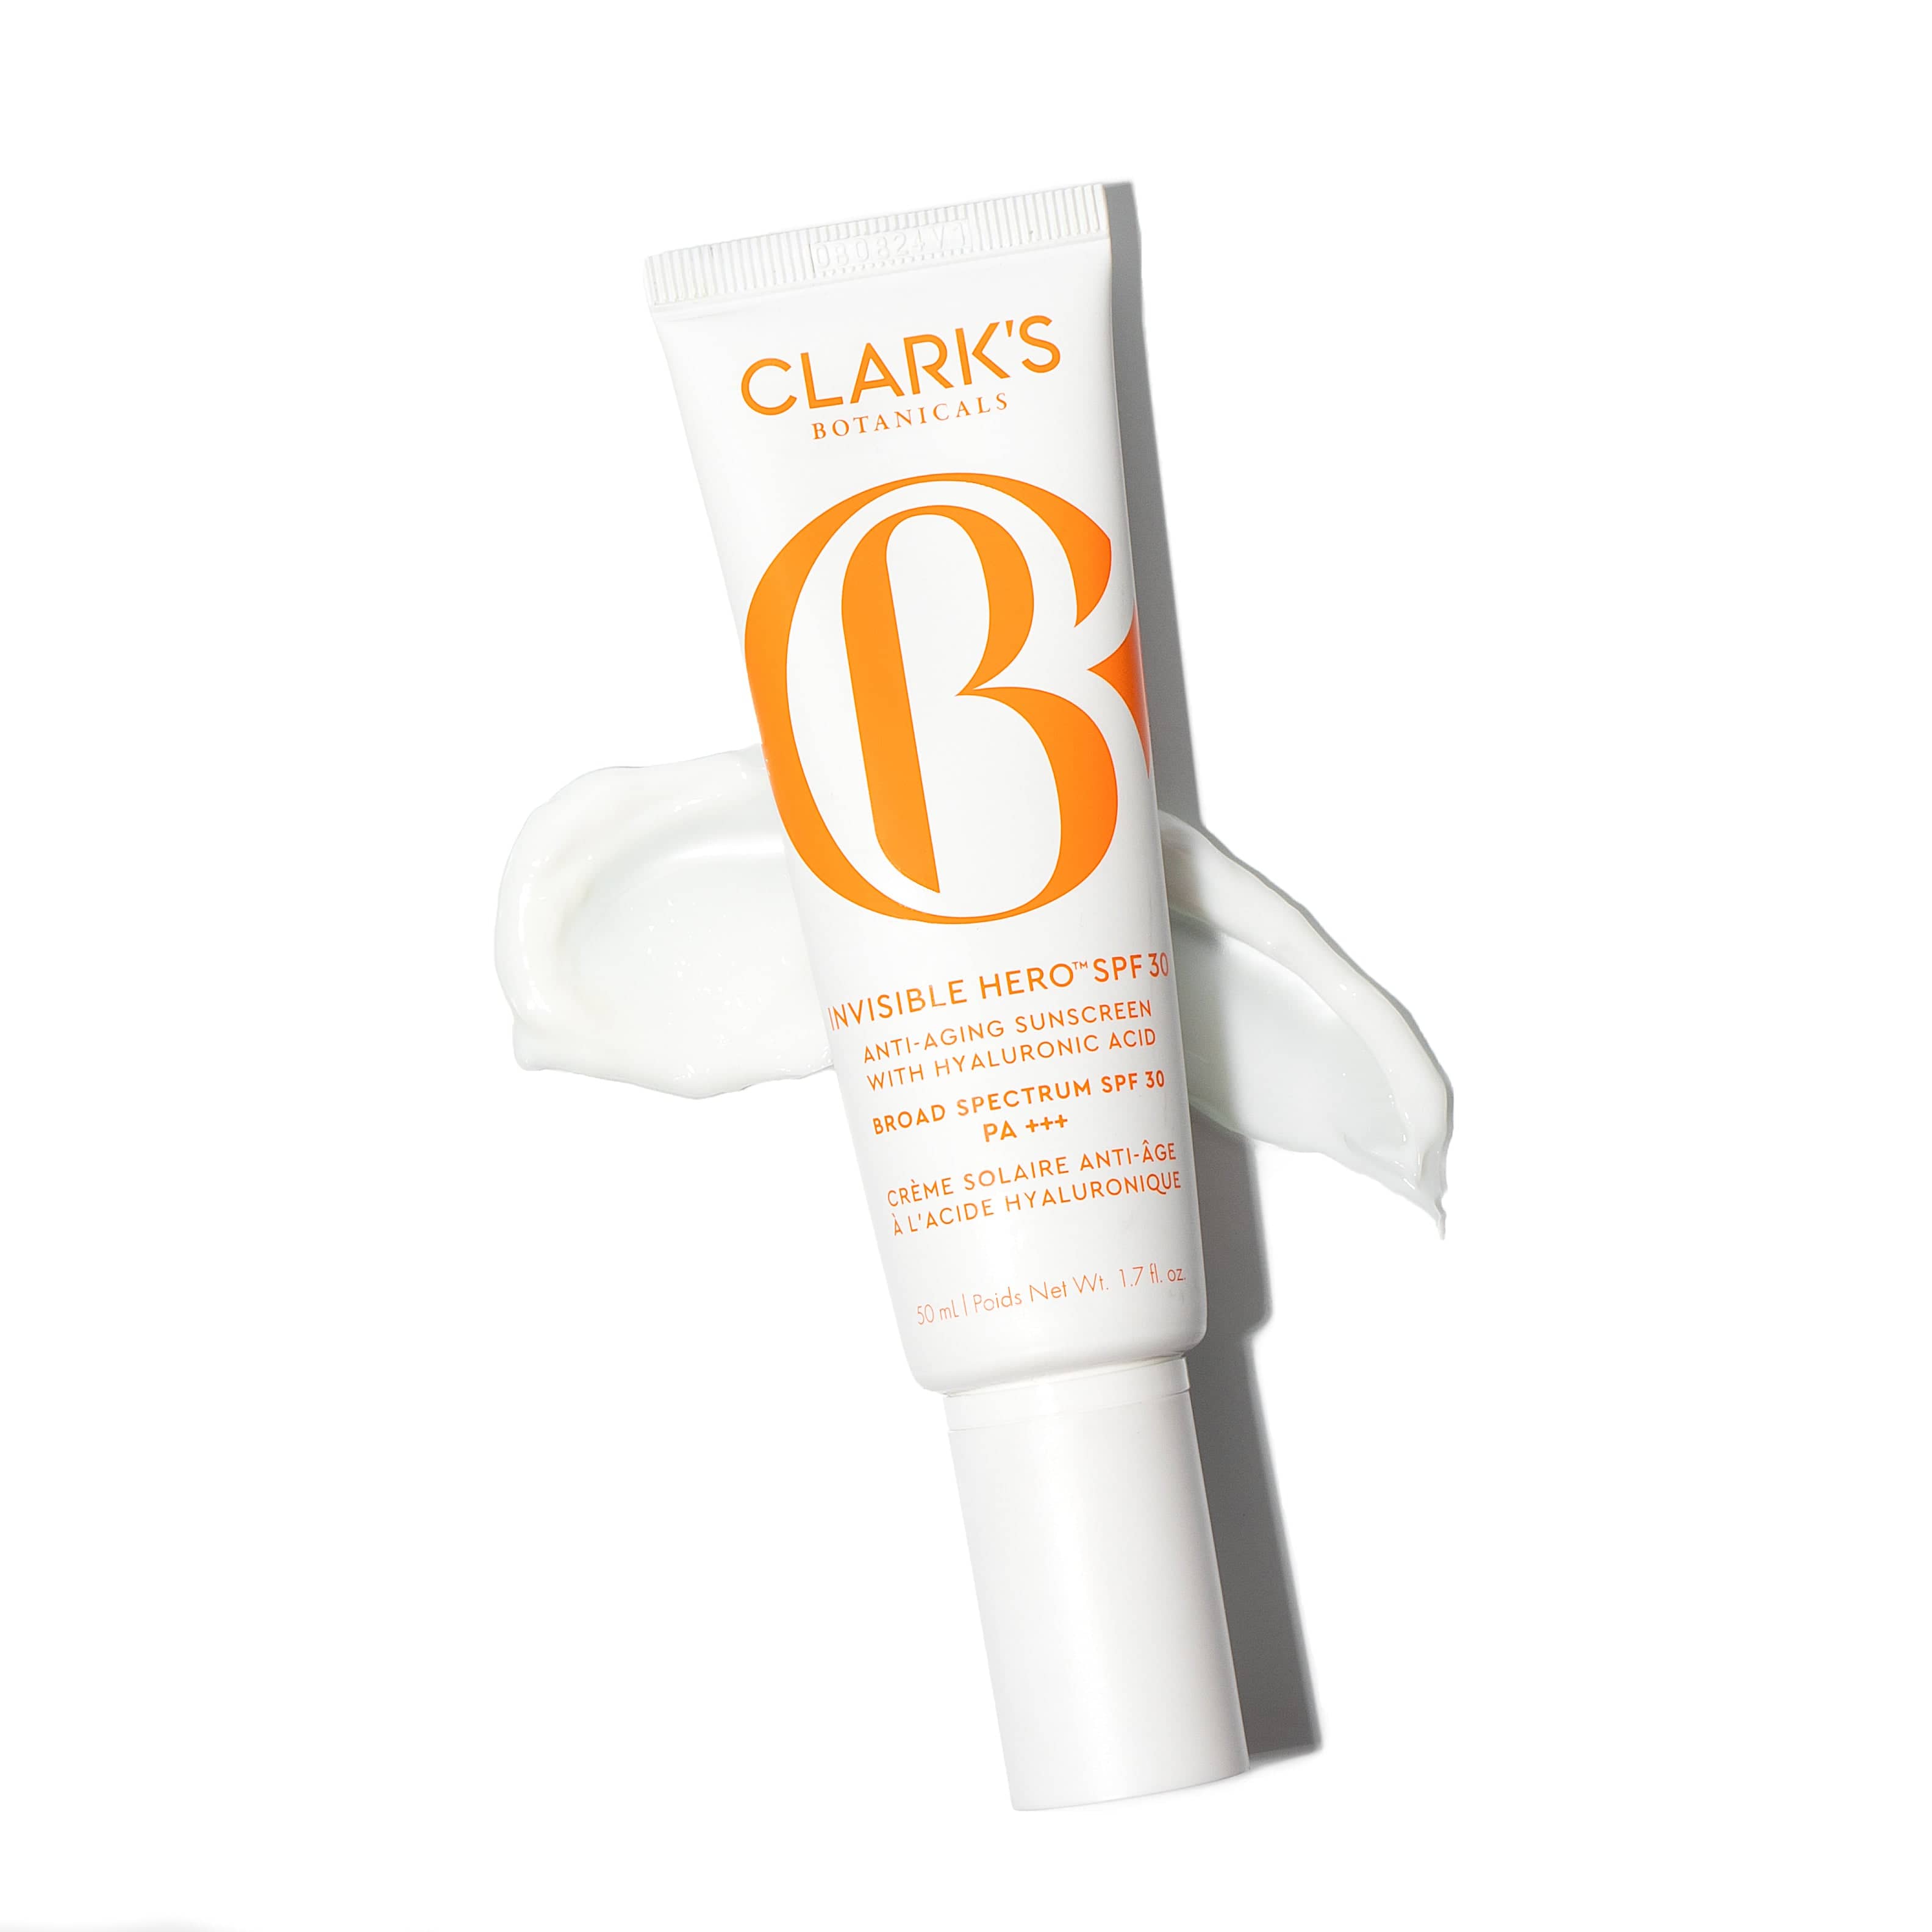 Clark’s Botanicals Invisible Hero SPF 30 Anti-aging Sunscreen with Hyaluronic Acid Broad Spectrum SPF PA+++